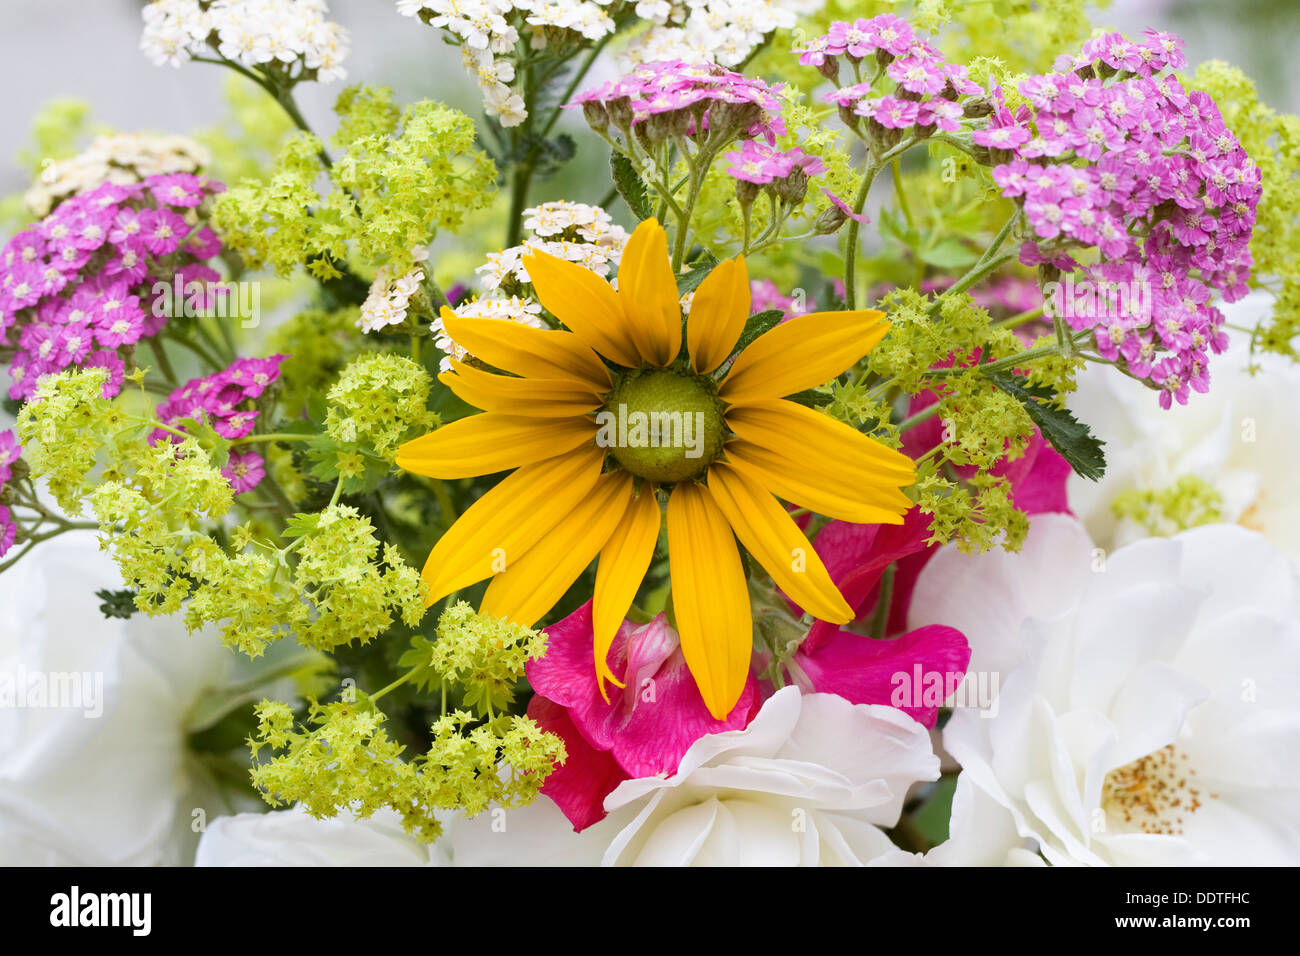 Freshly picked flowers from a summer garden. Achillea, Rudbeckia, Alchemilla, Roses and Sweet Peas. Stock Photo